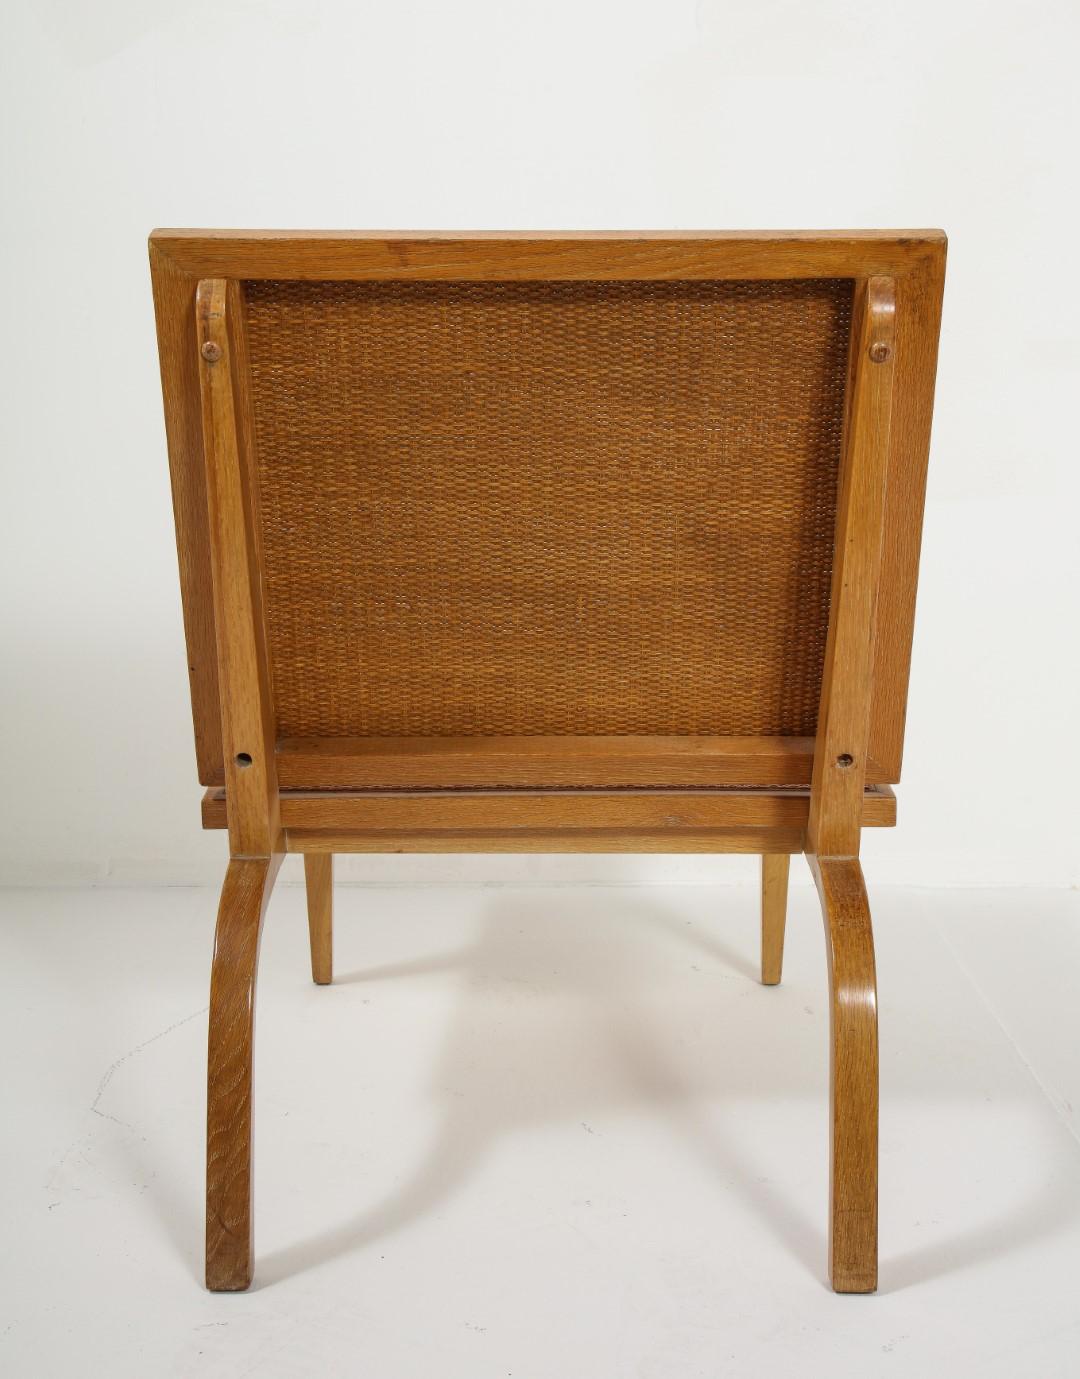 Midcentury Woven Oak Lounge Chair by Edward Durell Stone for Fulbright For Sale 6